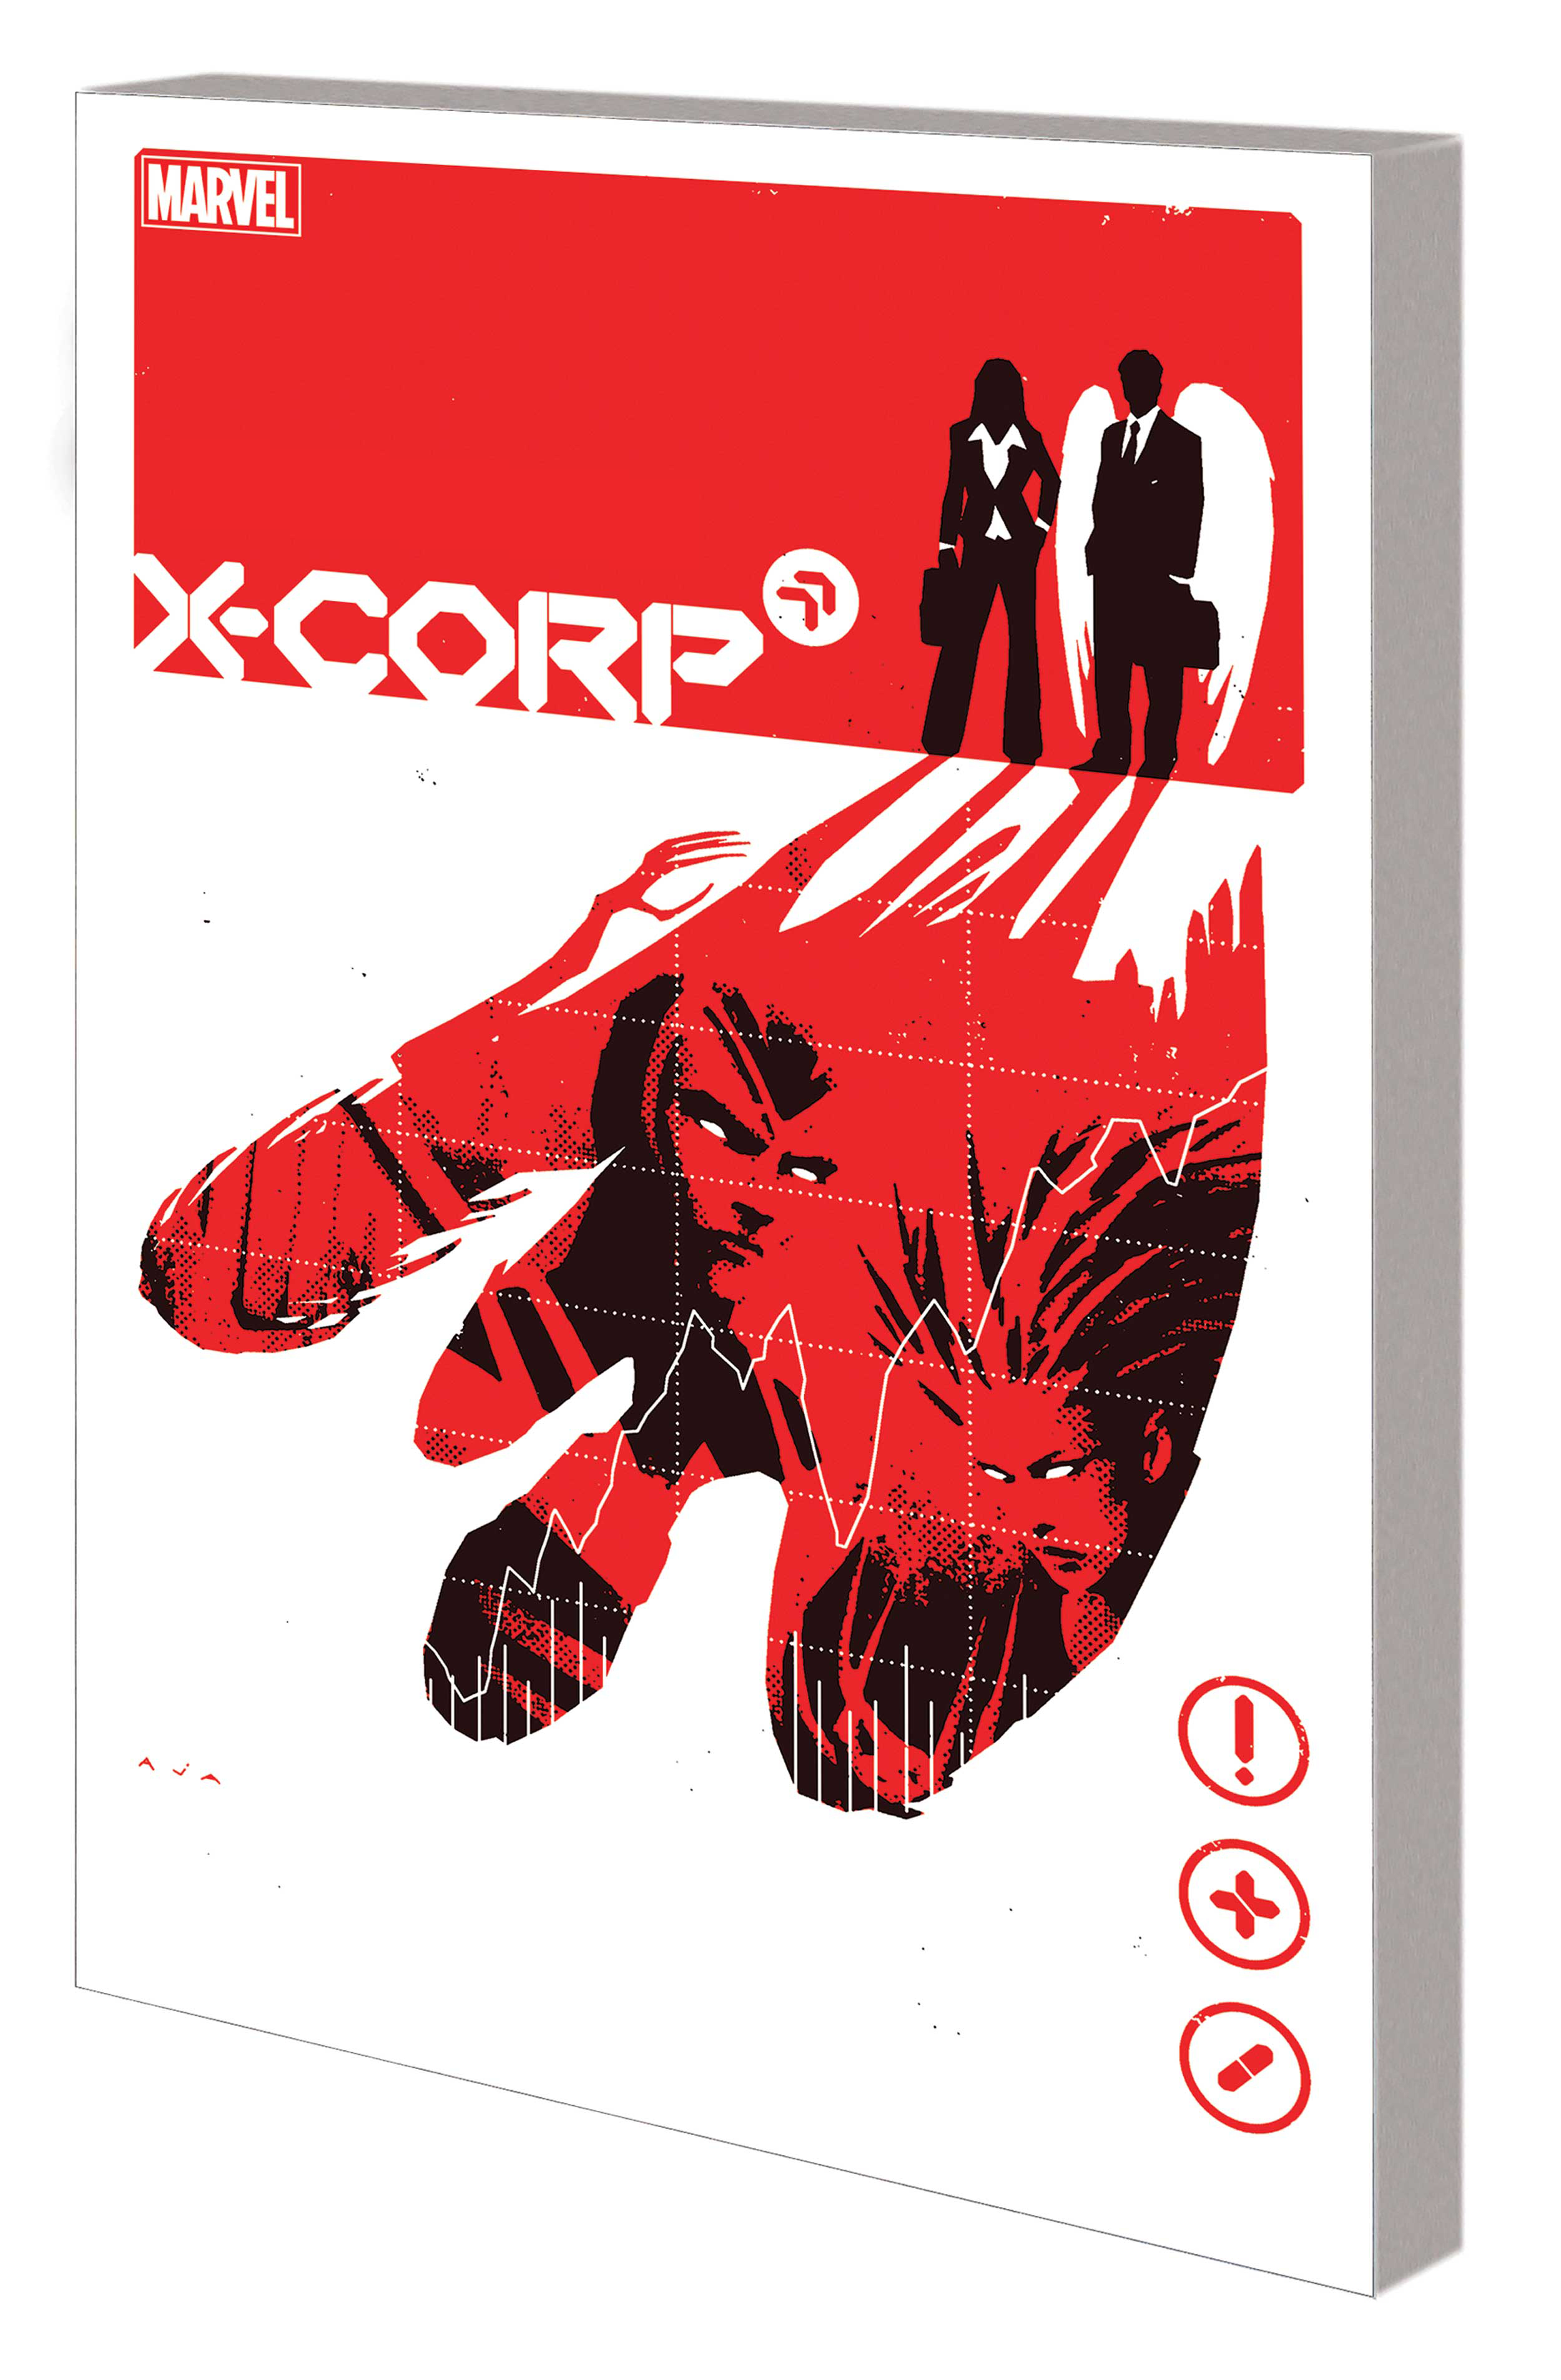 X-Corp by Tini Howard Graphic Novel Volume 1